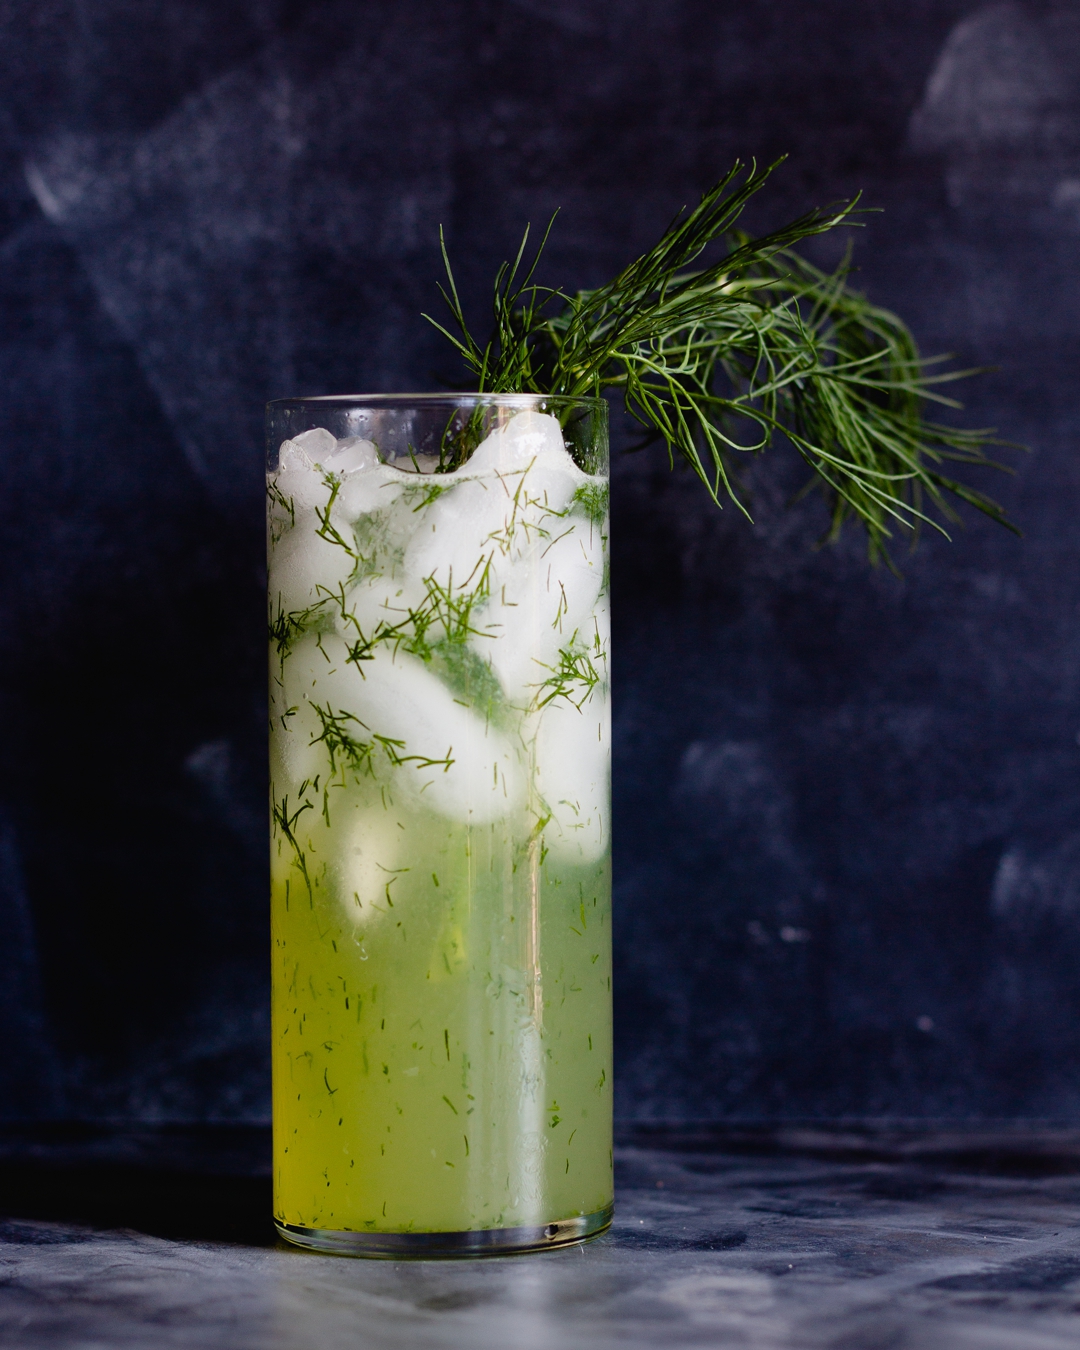 This Gin Mojito with Dill is an aromatic cocktail that feels like a breath of fresh air; light, herby, and refreshing. #gin #mojito #cocktail #dill | www.megiswell.com